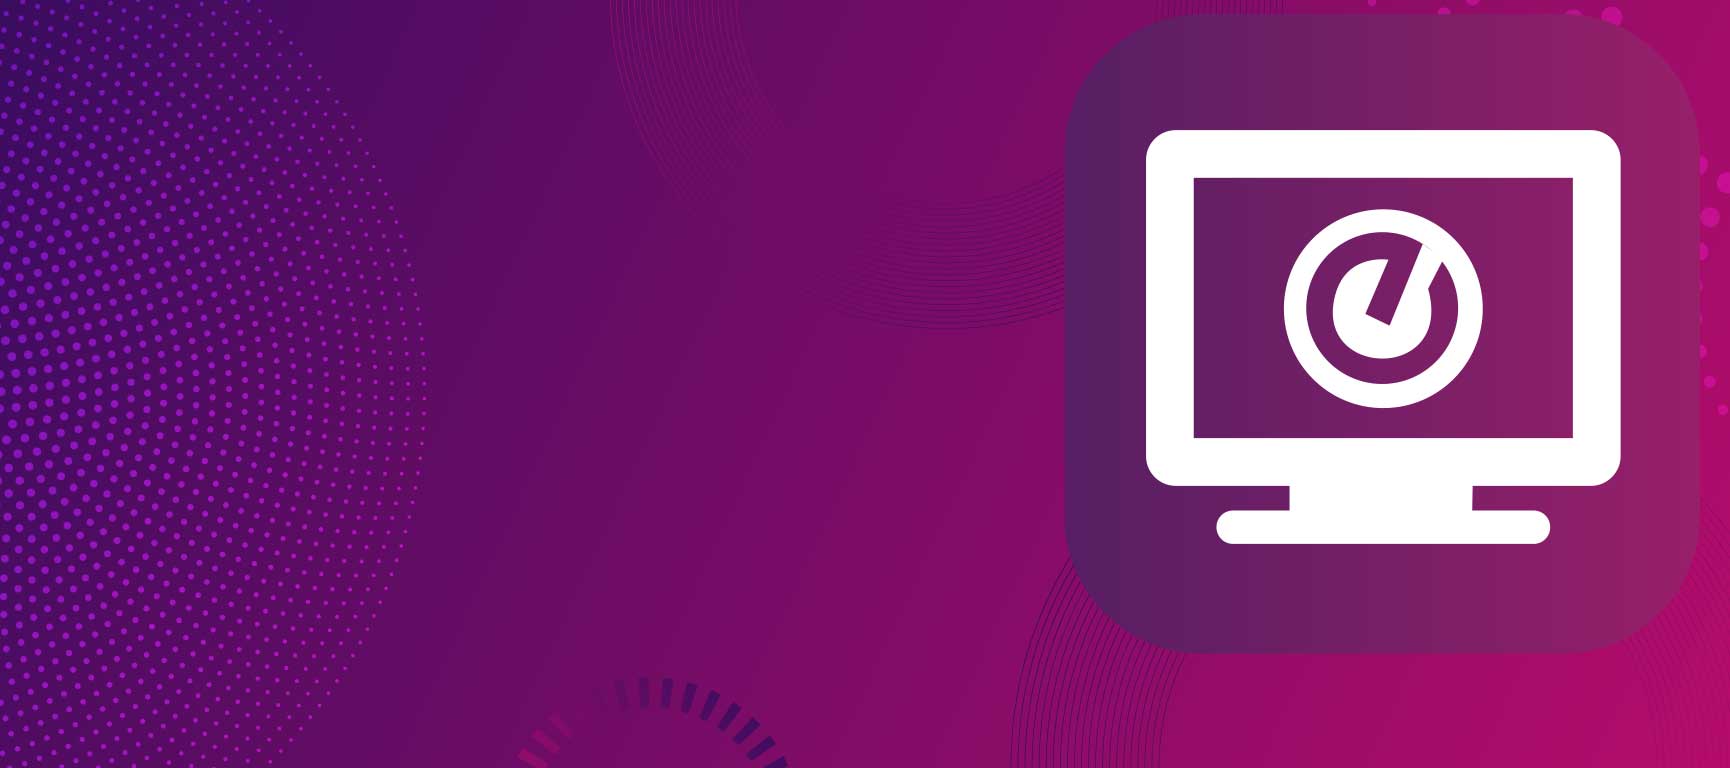 Large purple abstract background with self service icon in white